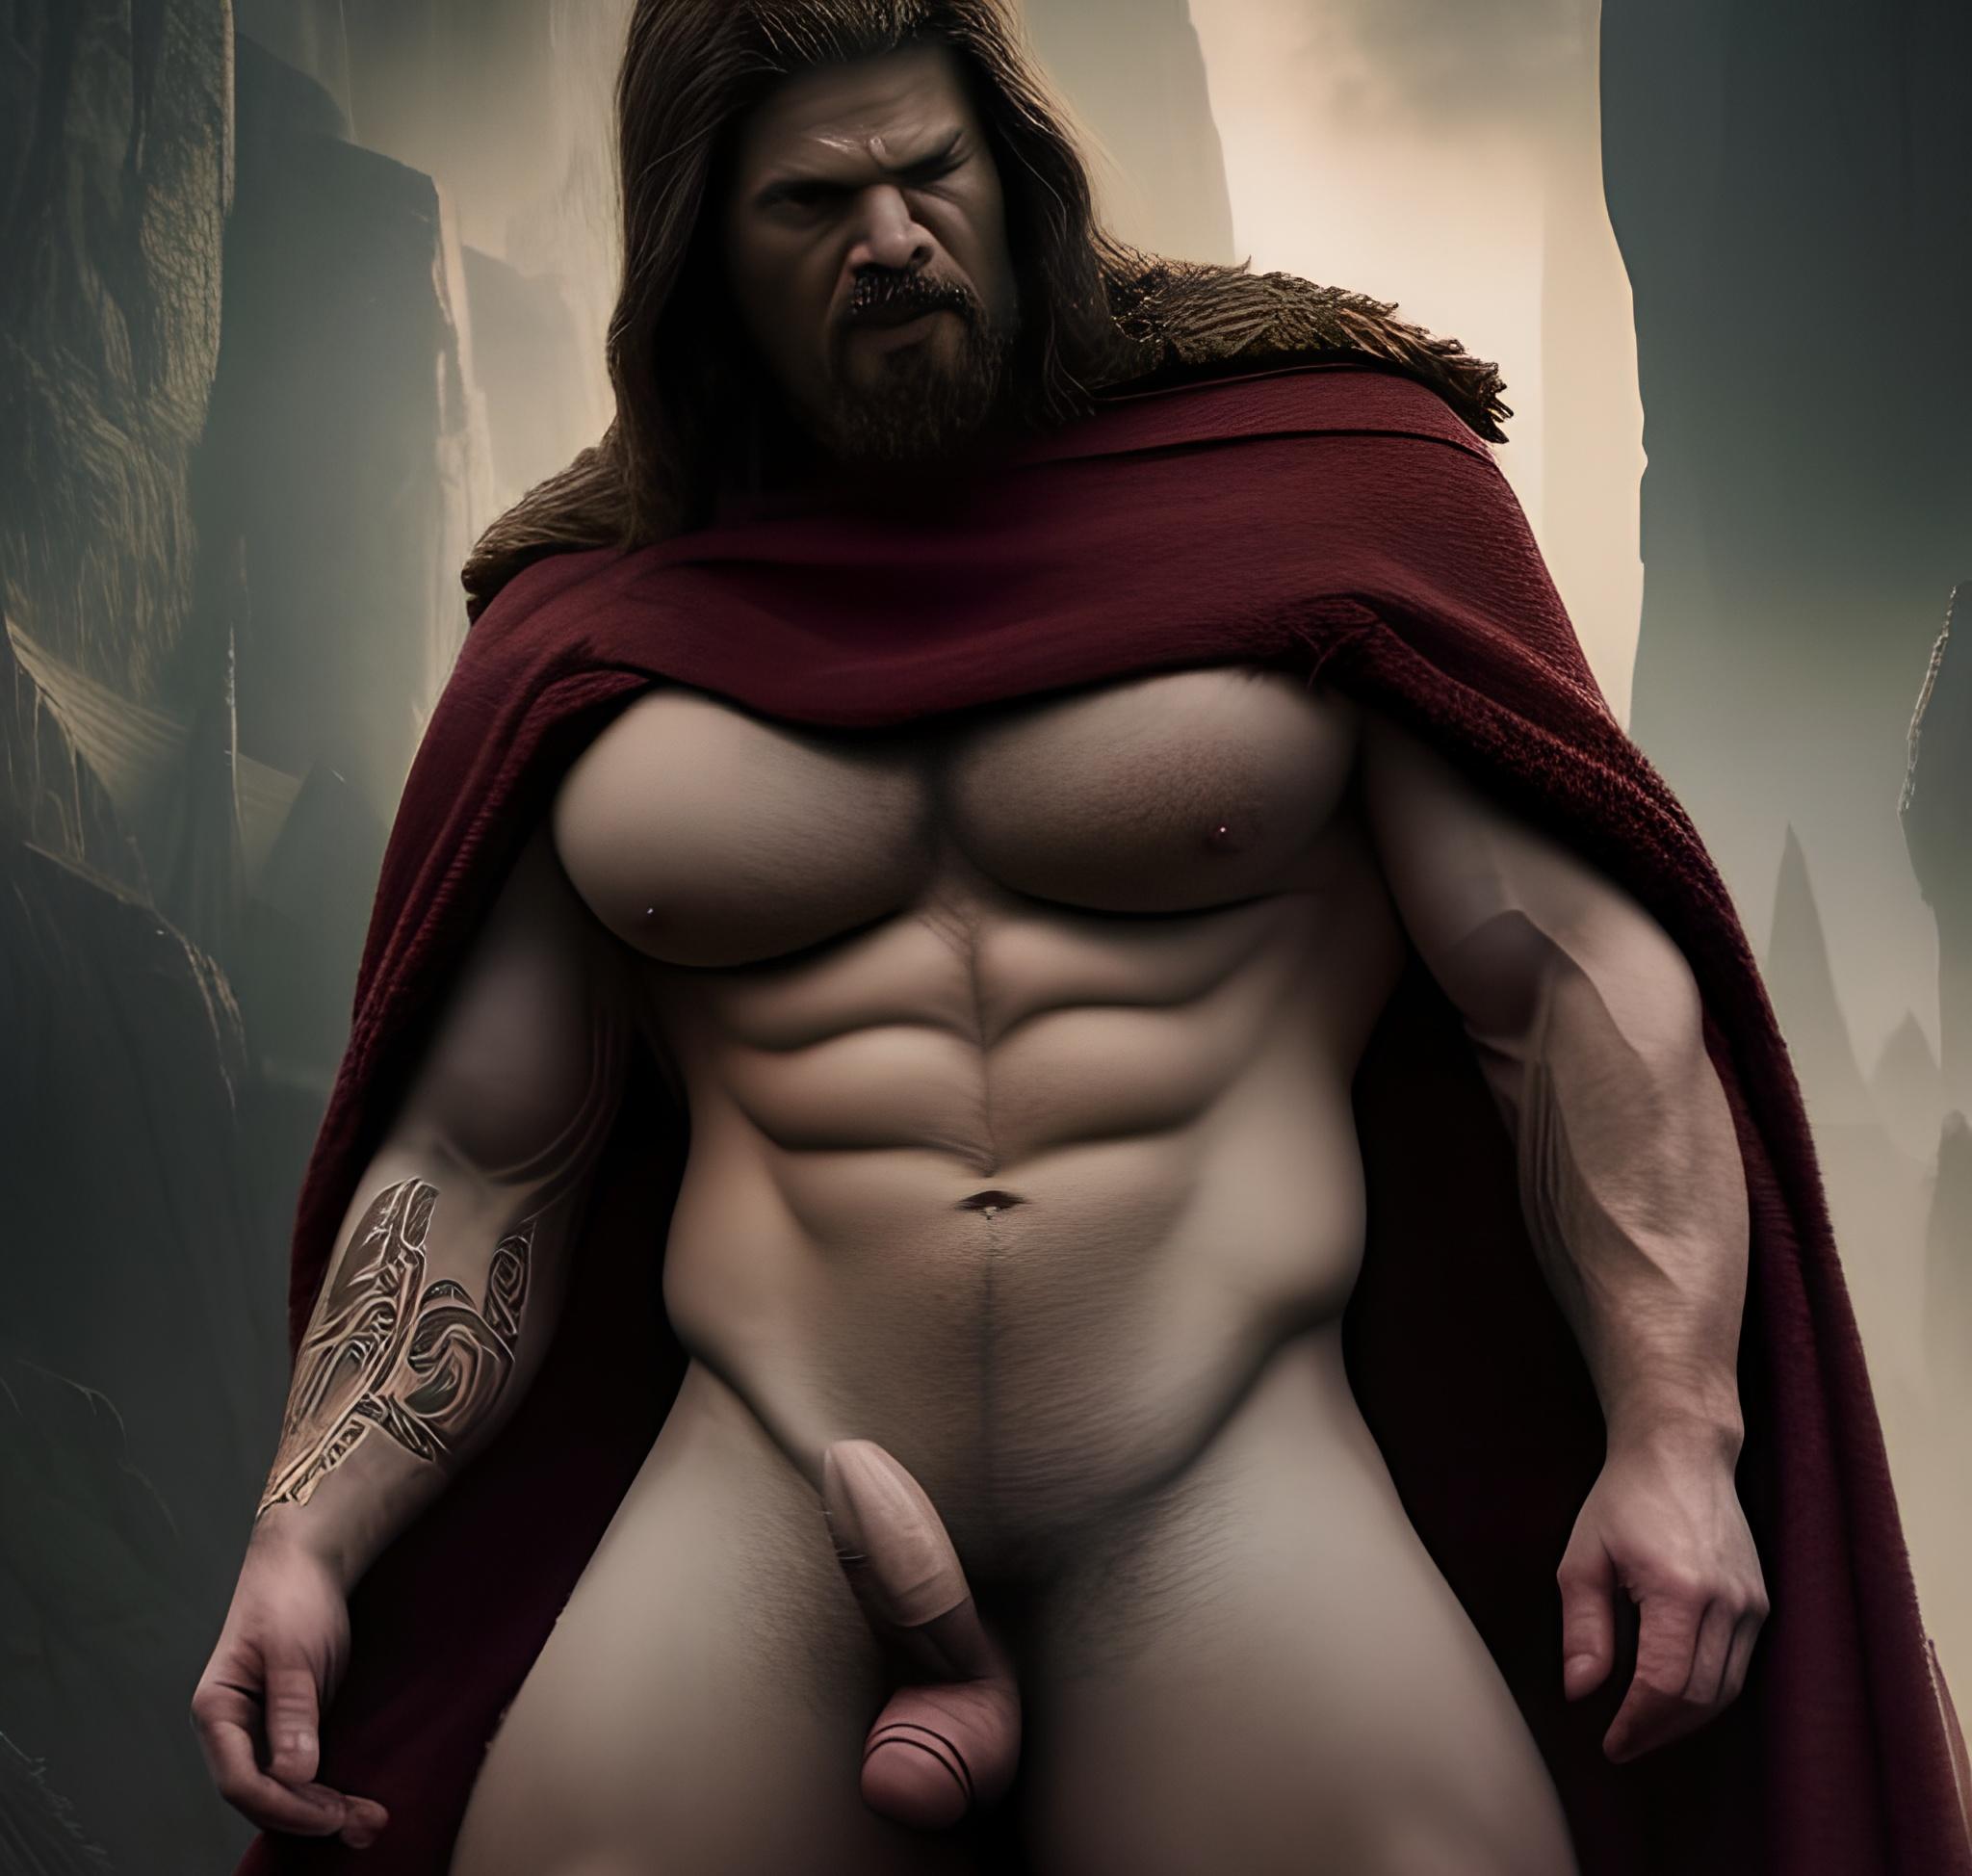 30yo Viking Bodybuilders Erect Thick Big Dick in Dark Fantasy Mountains Angry Black Hair, Partially Nude, pic